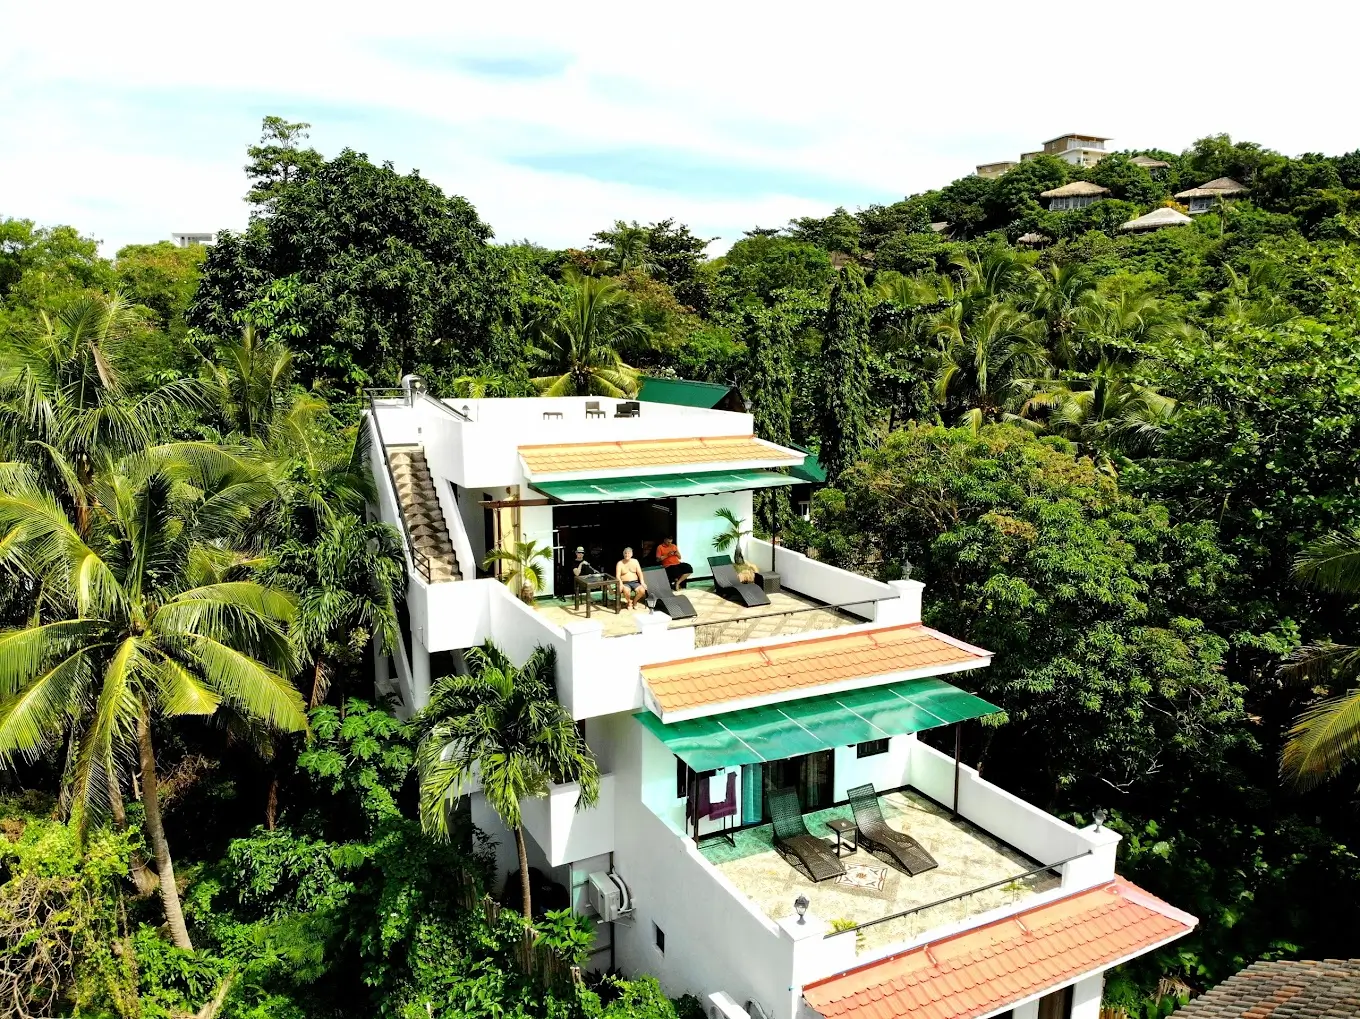 Aerial view of Sulu Sea Boutique Hotel, a boutique resort in Boracay, nestled among dense tropical foliage. The resort features multiple terraces and is surrounded by lush greenery, providing a secluded retreat.